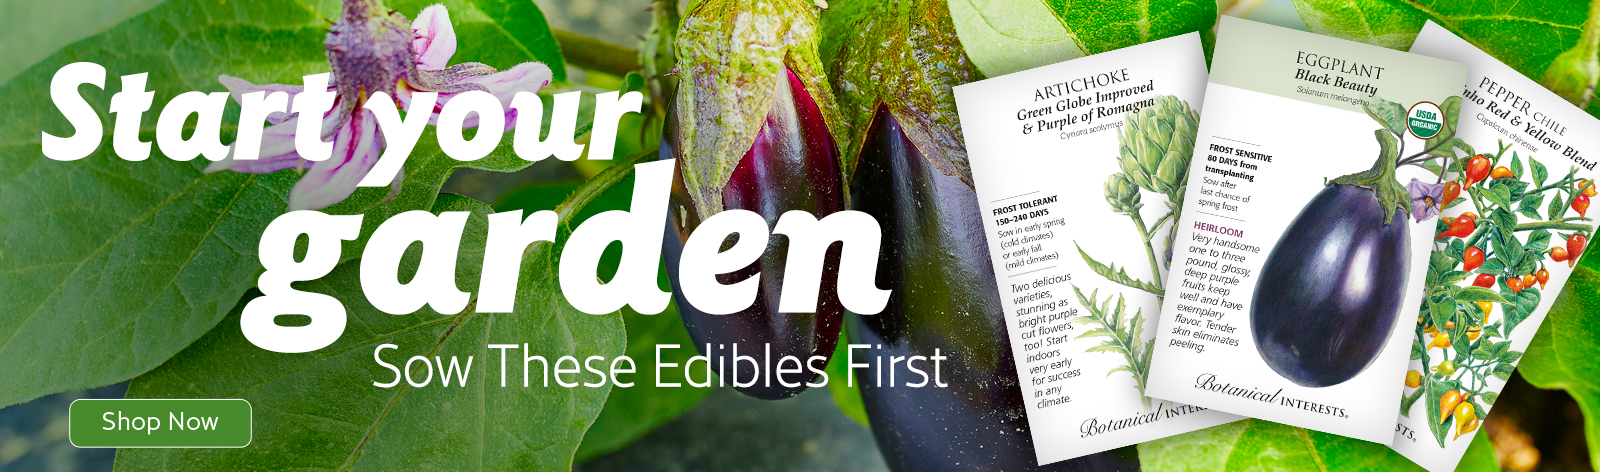 Start Your Garden! Sow These Edibles First!